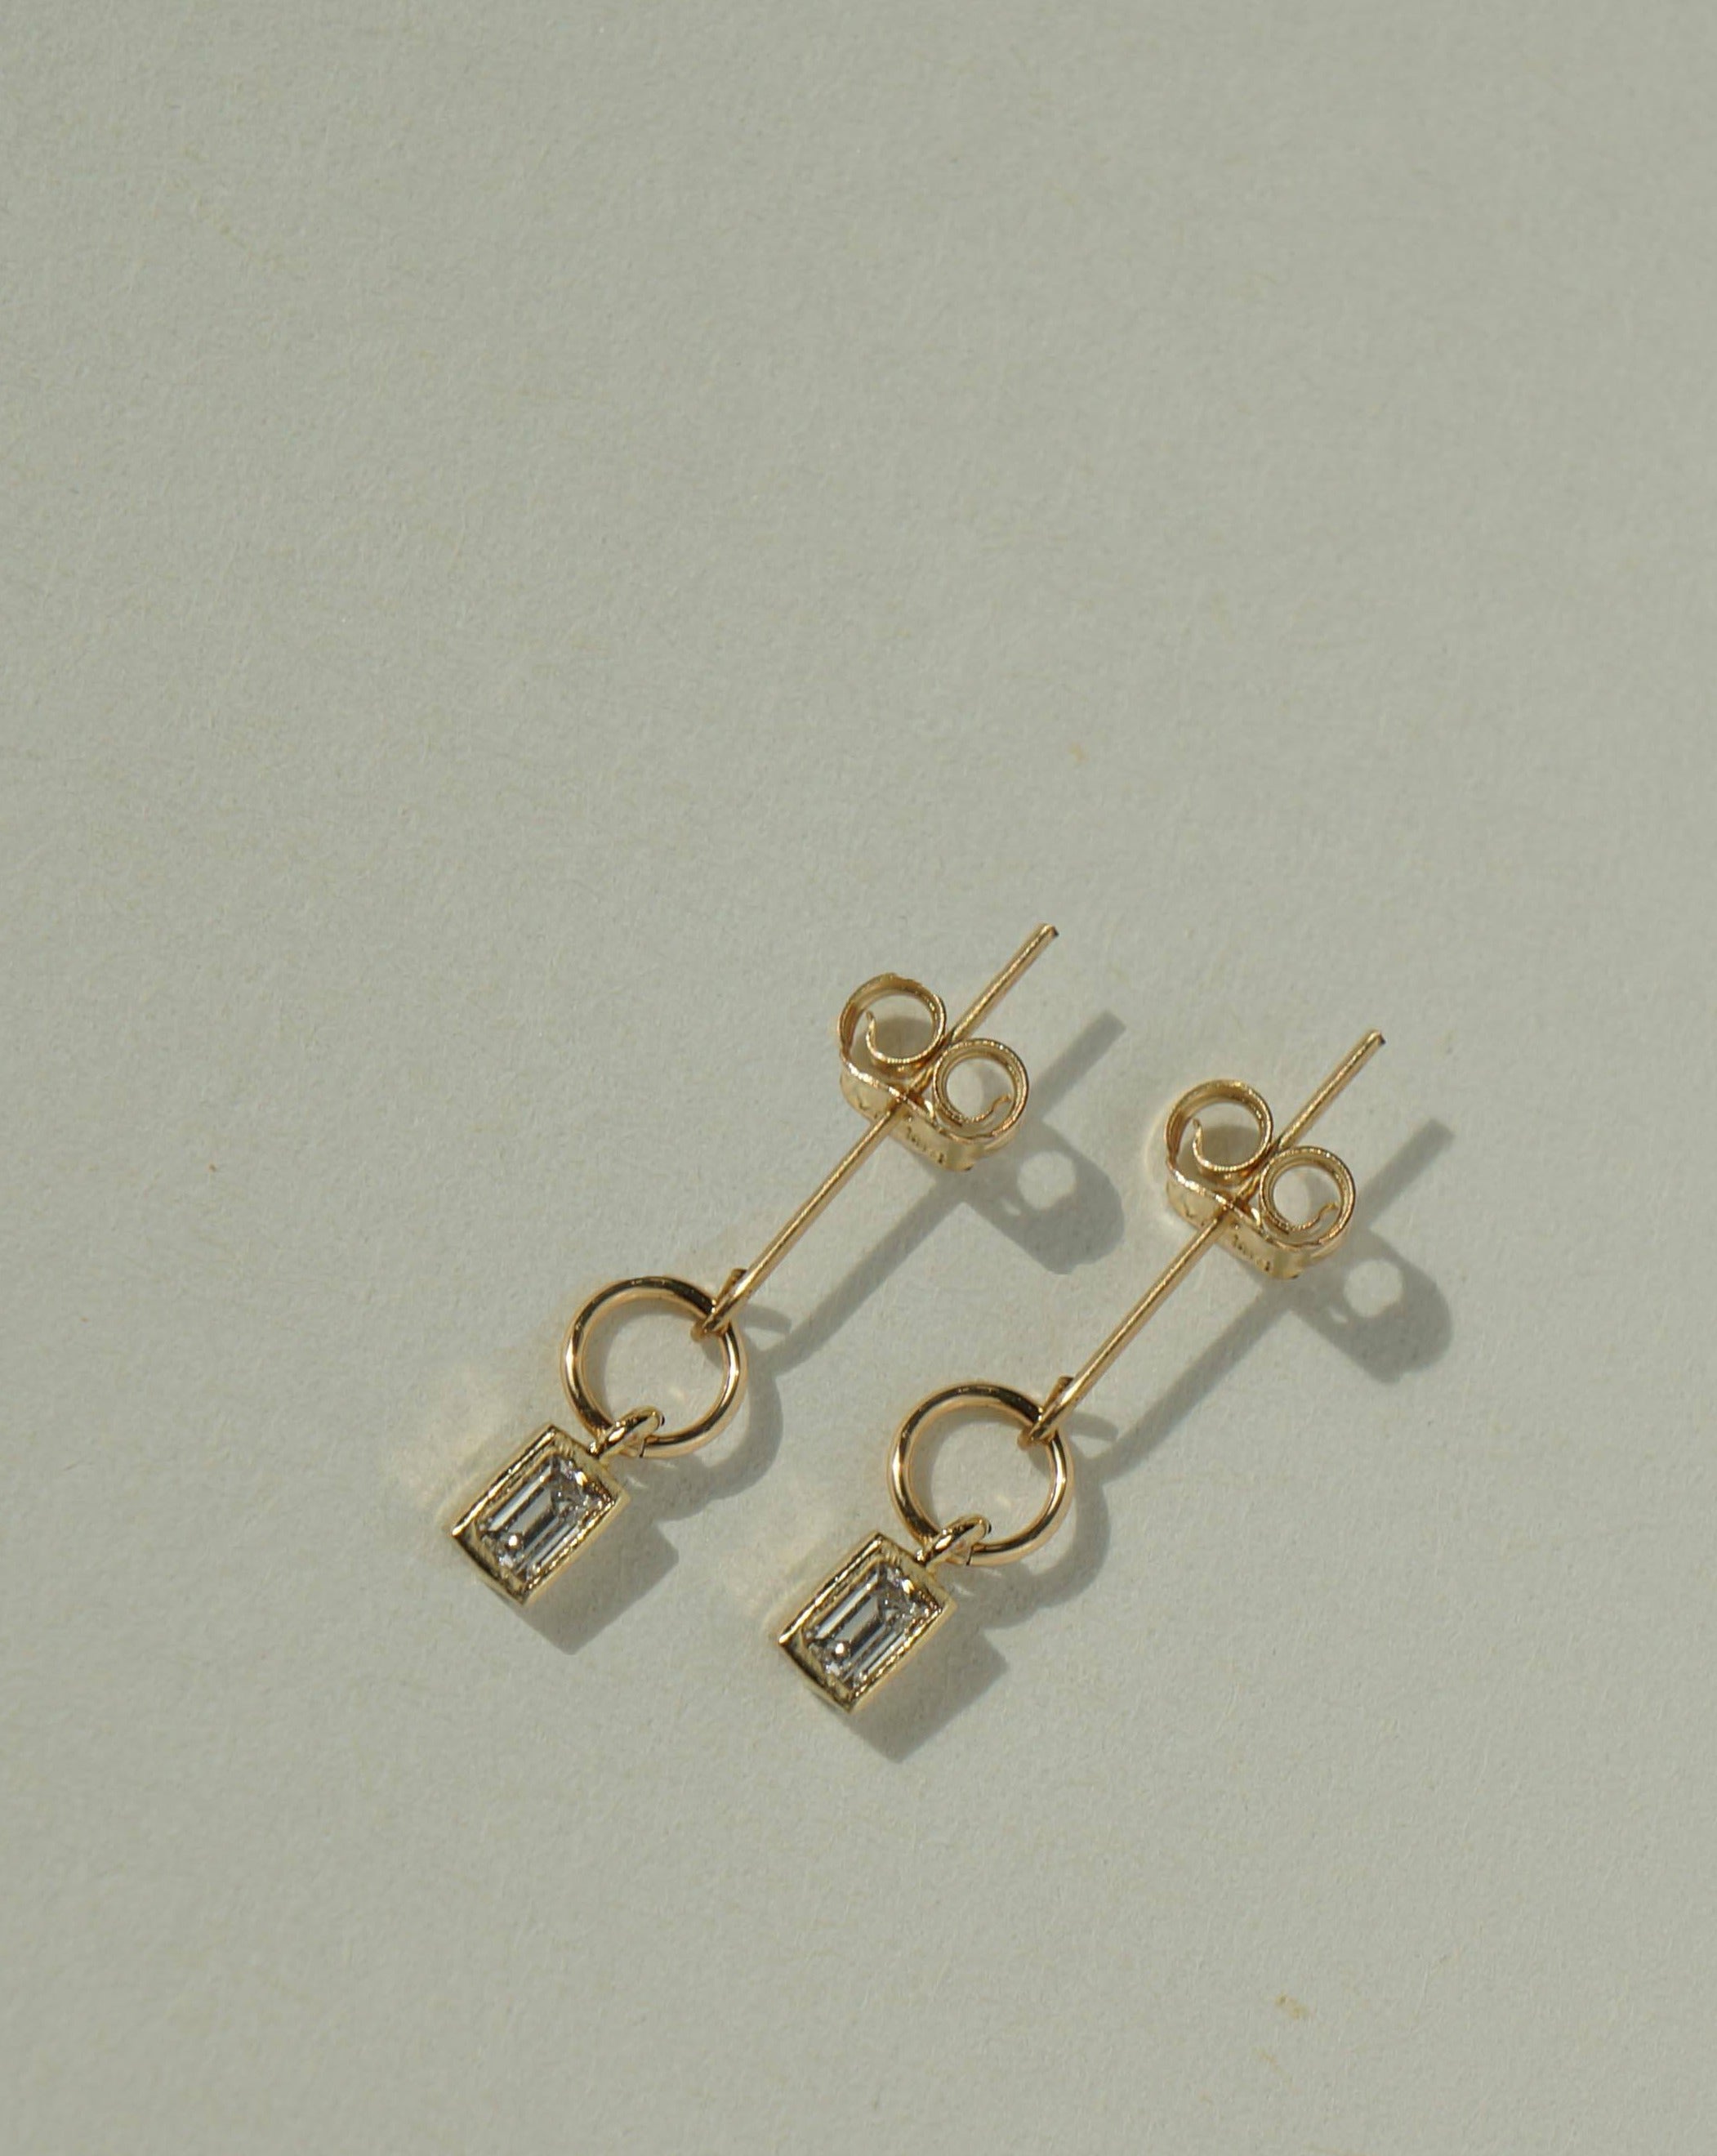 Penelope Earrings by KOZAKH. Stud earrings with mini dangle, crafted in 14K Gold Filled, featuring a faceted square cut Cubic Zirconia.